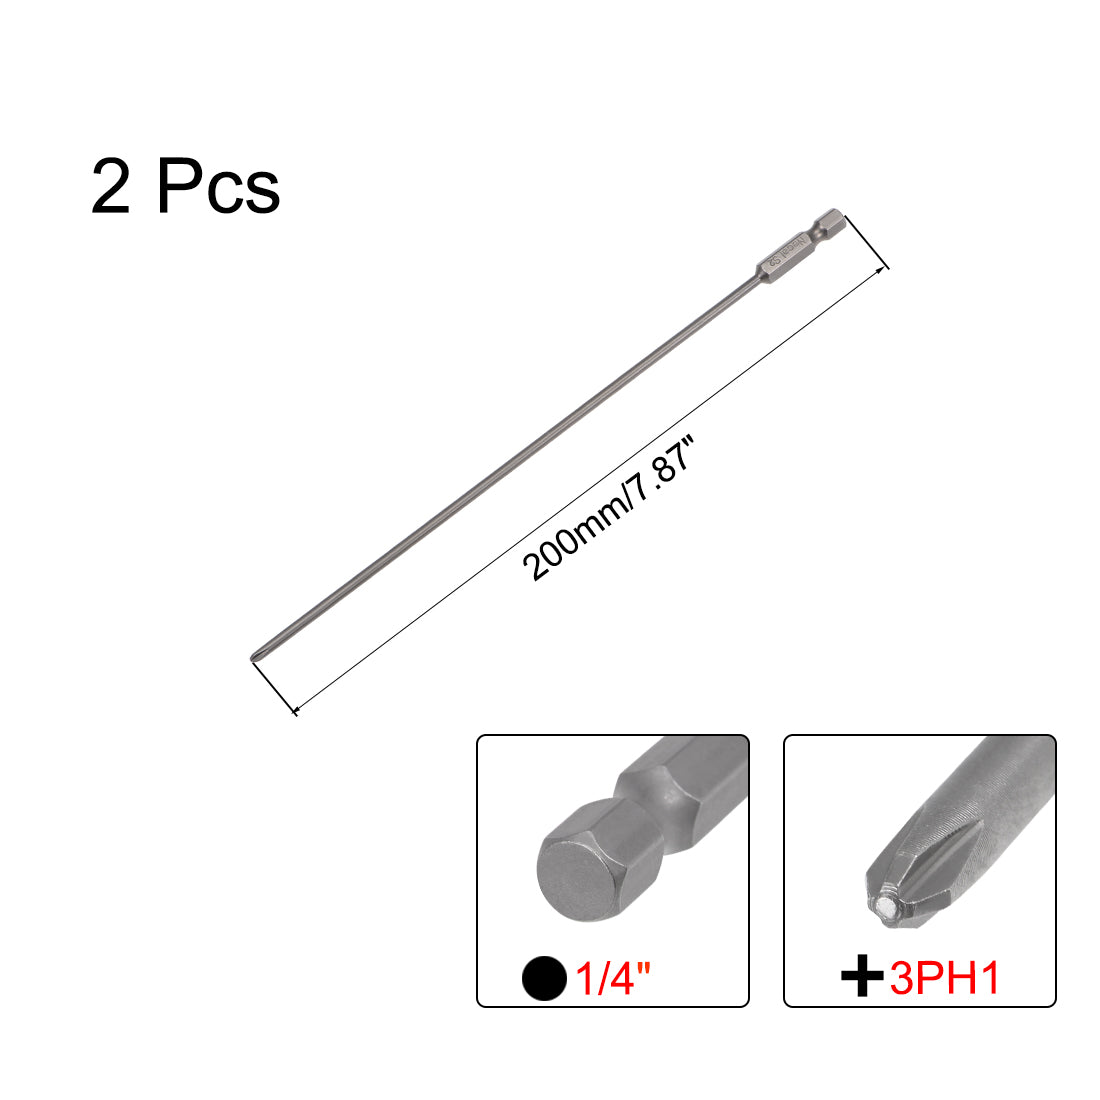 uxcell Uxcell Phillips Bits 1/4-Inch Hex Shank 200mm Length Cross 3PH1 Magnetic Screw Driver S2 Screwdriver Bit 2Pcs